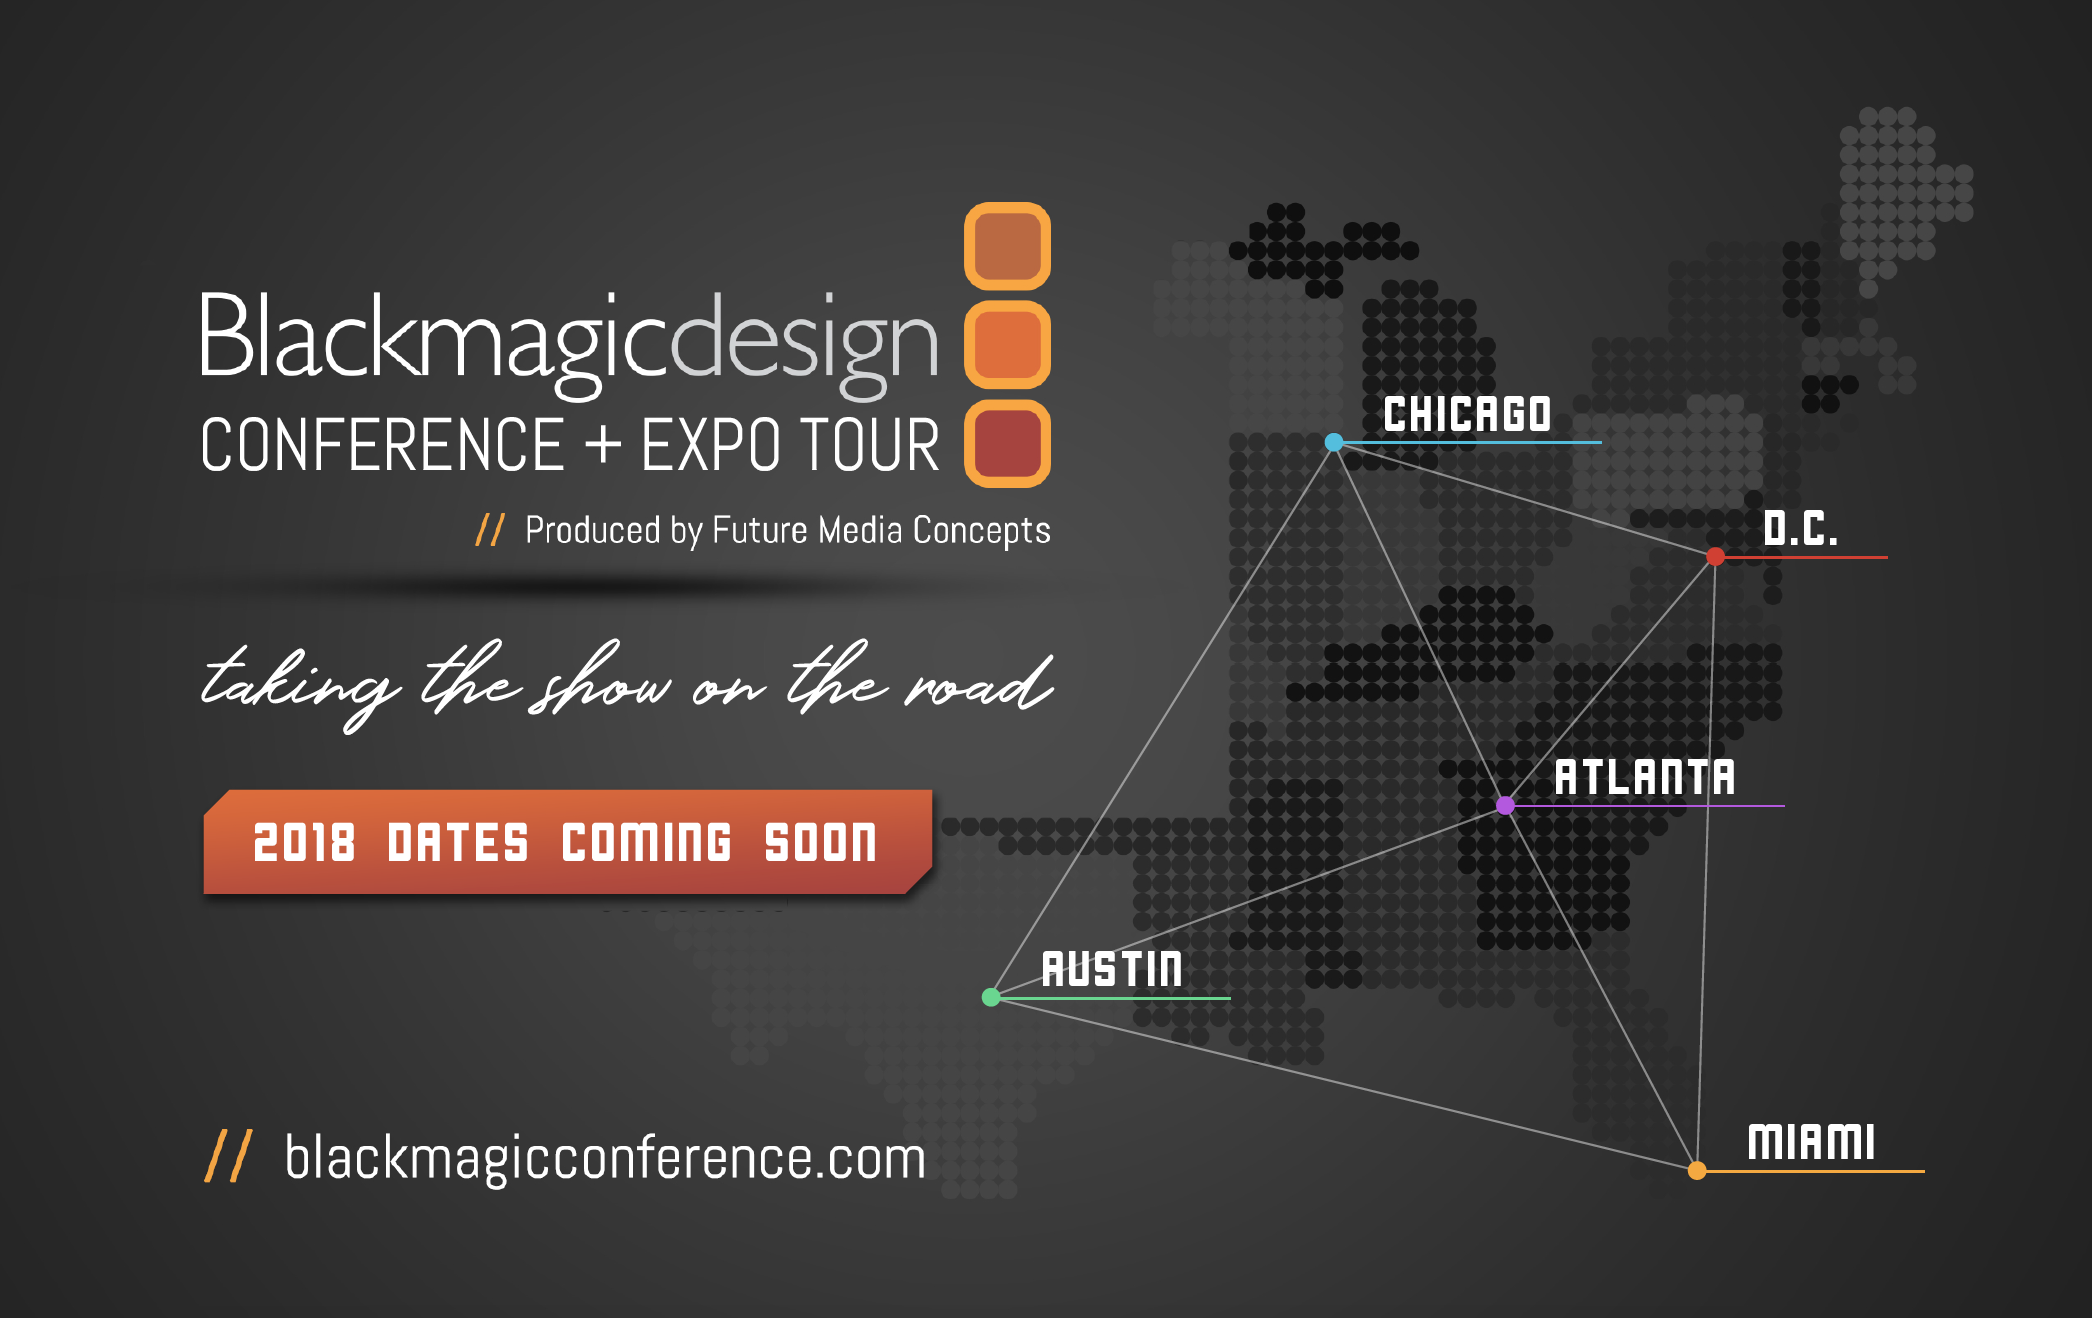 A training event designed for professionals interested to learn more about the Blackmagic Design ecosystem.